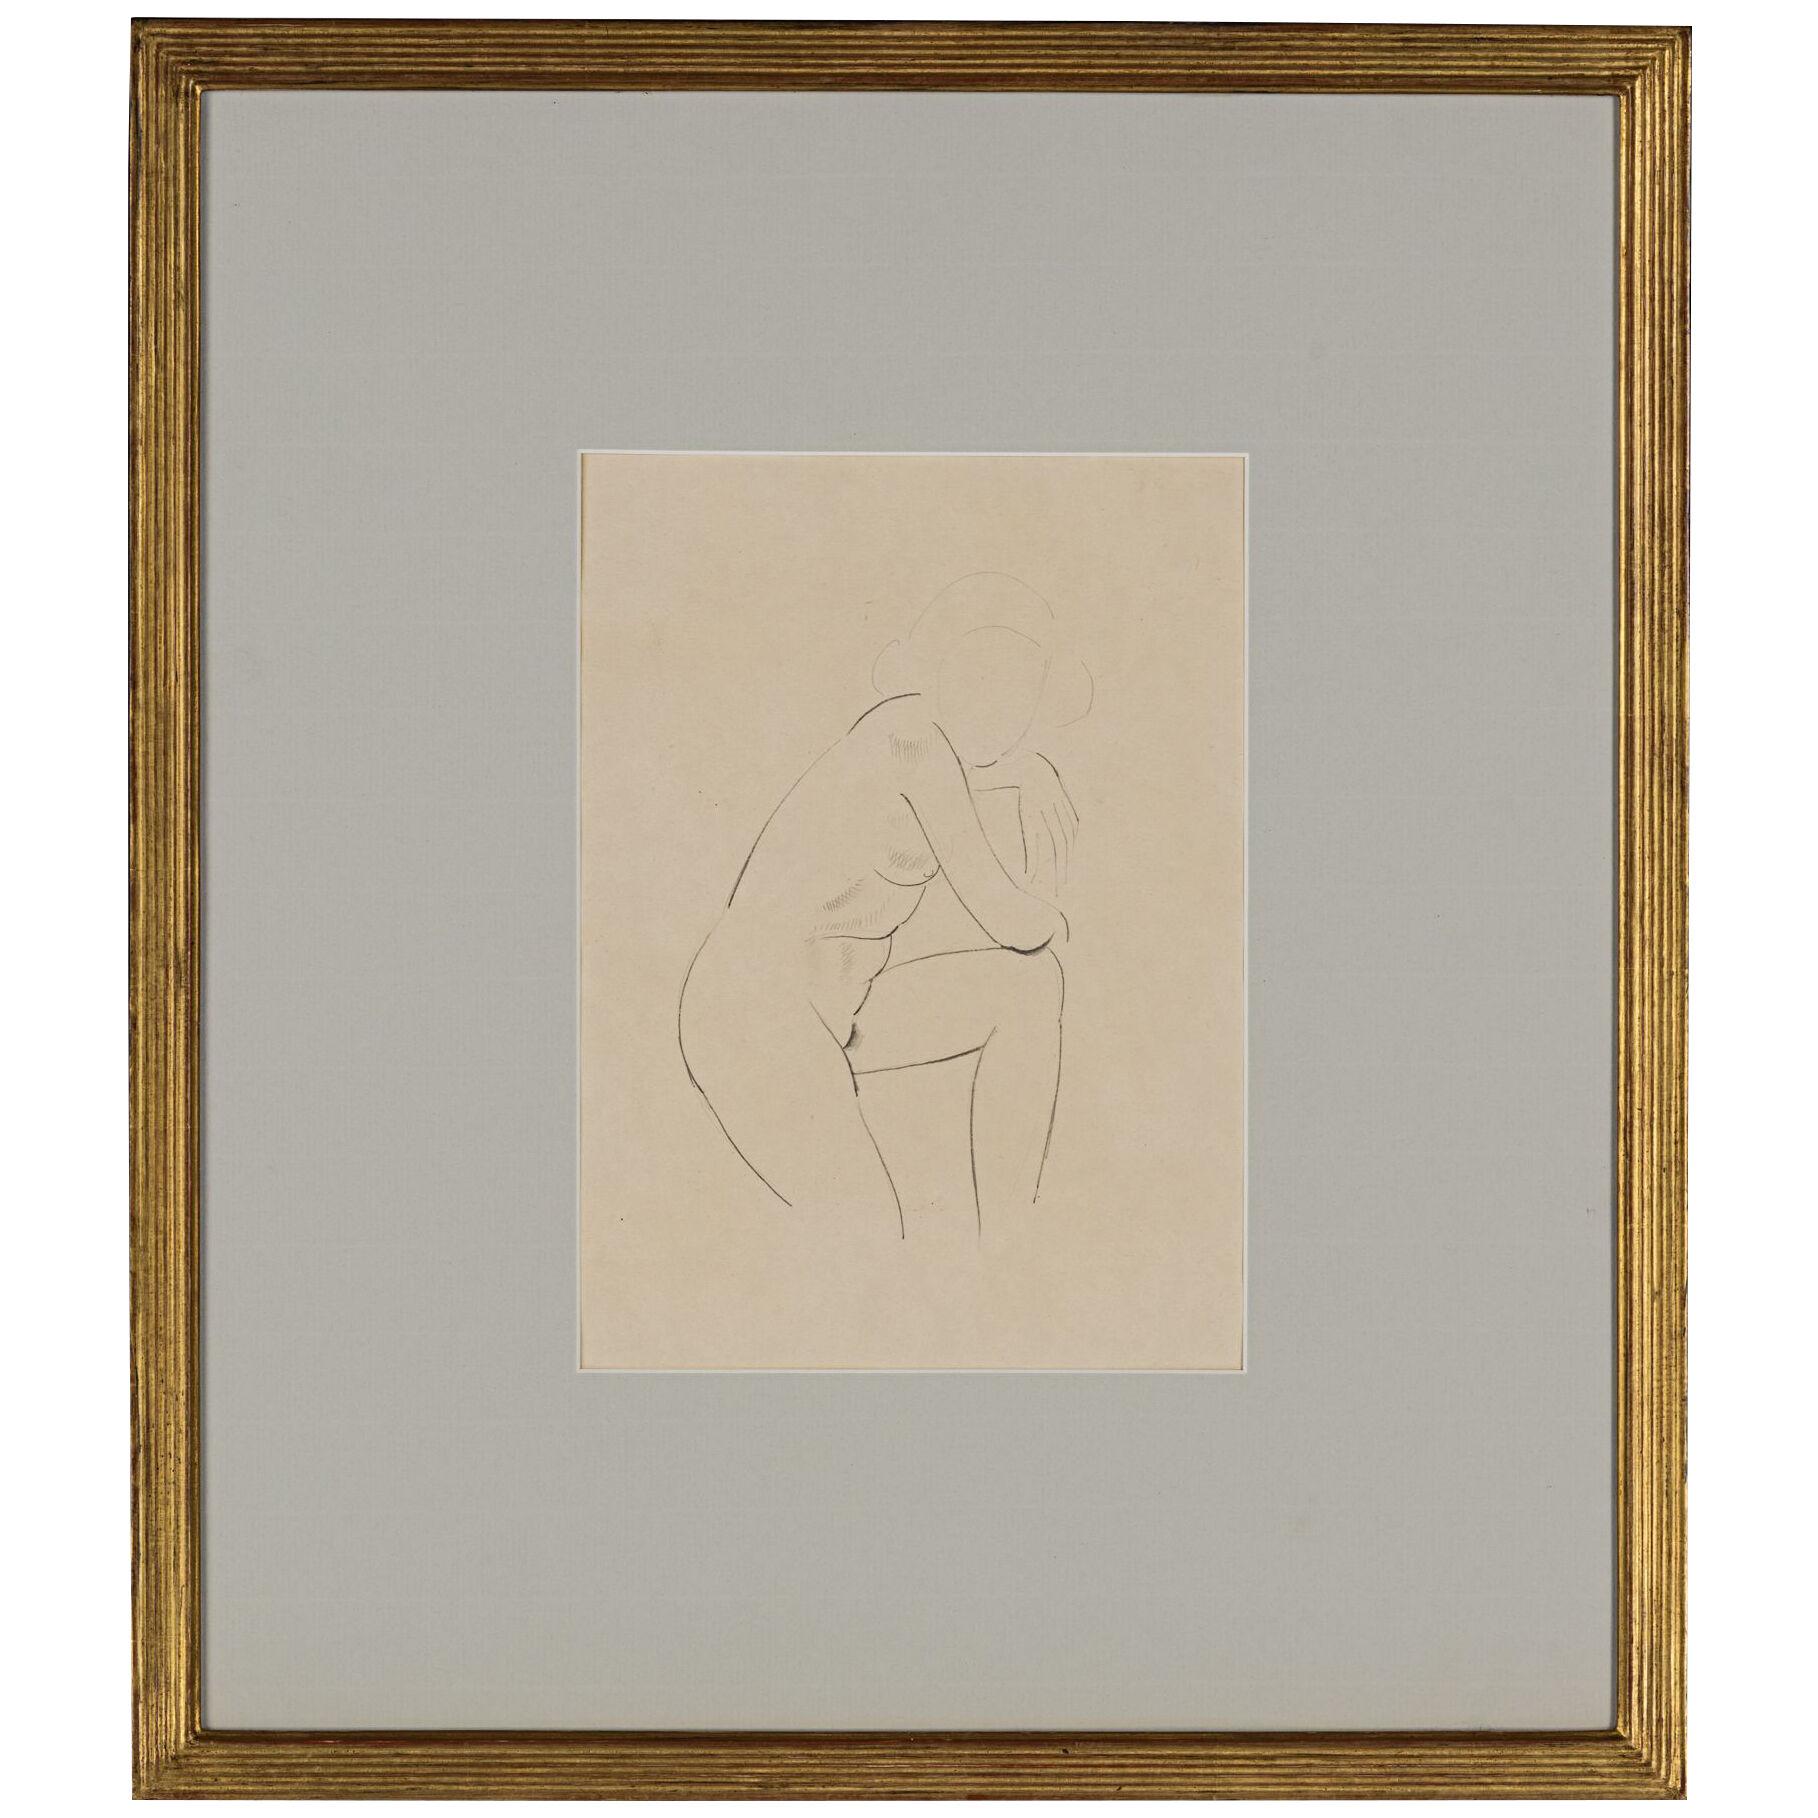 STUDY OF A FEMALE NUDE - Eric Gill 1882-1940